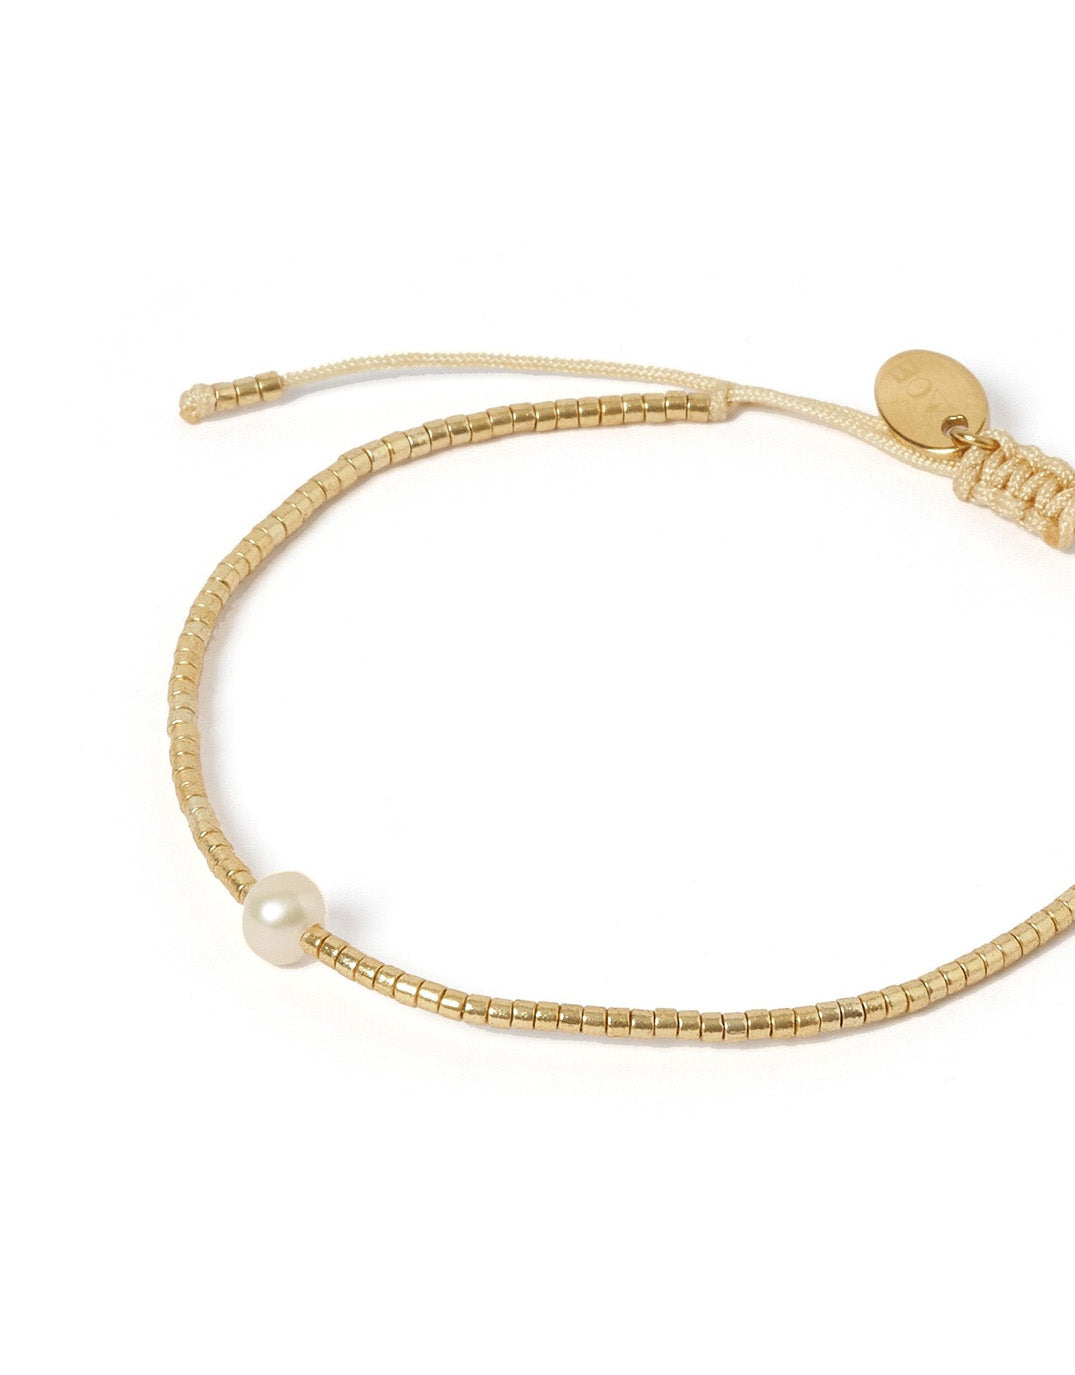 arms-of-eve-river-gold-and-pearl-bracelet